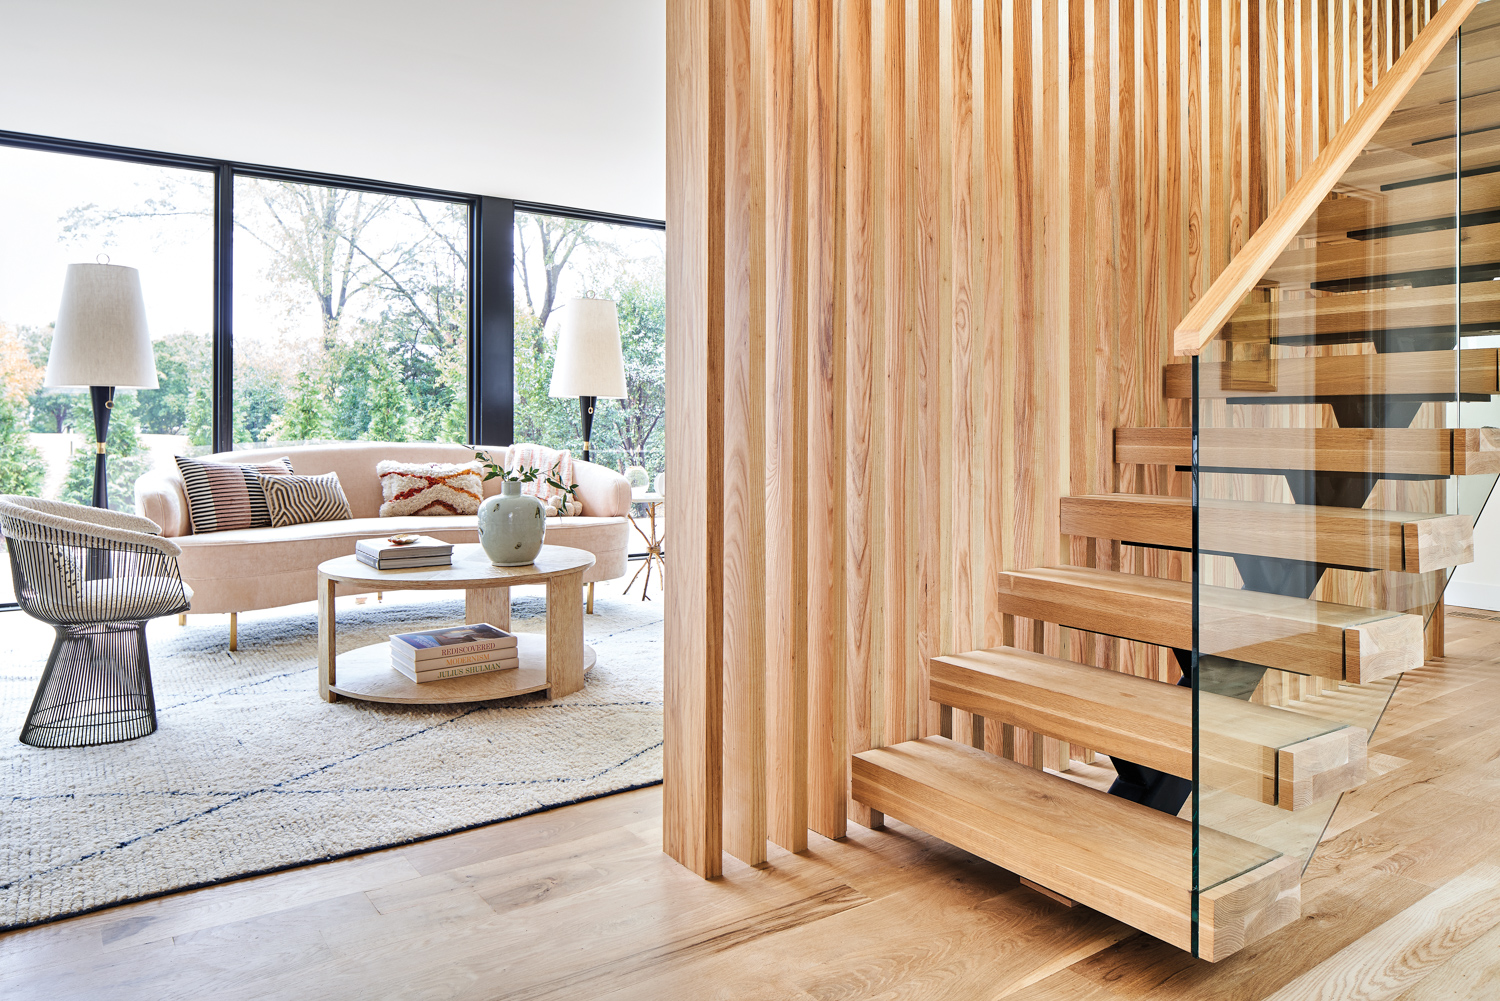 Sitting room divided from staircase by modern slatted screen